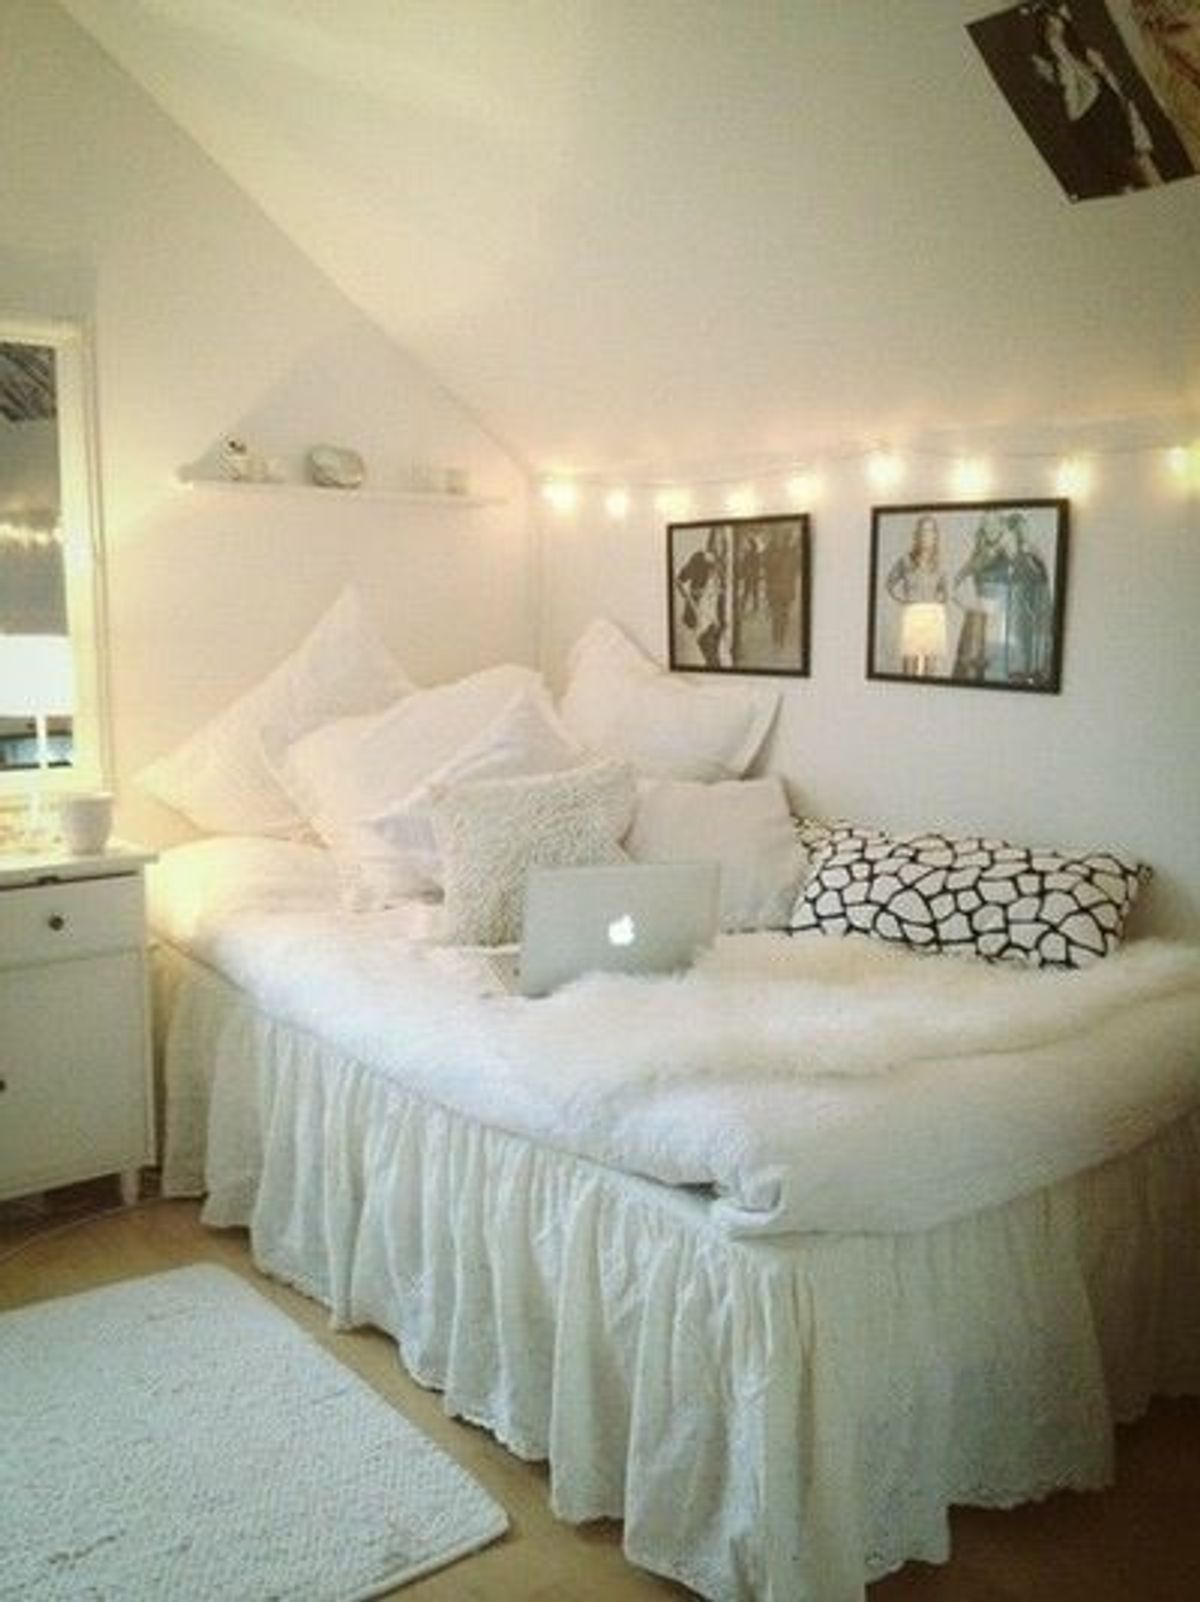 Lovely tumblr bedroom 7 Ways To Make Your Room Tumblr Worthy